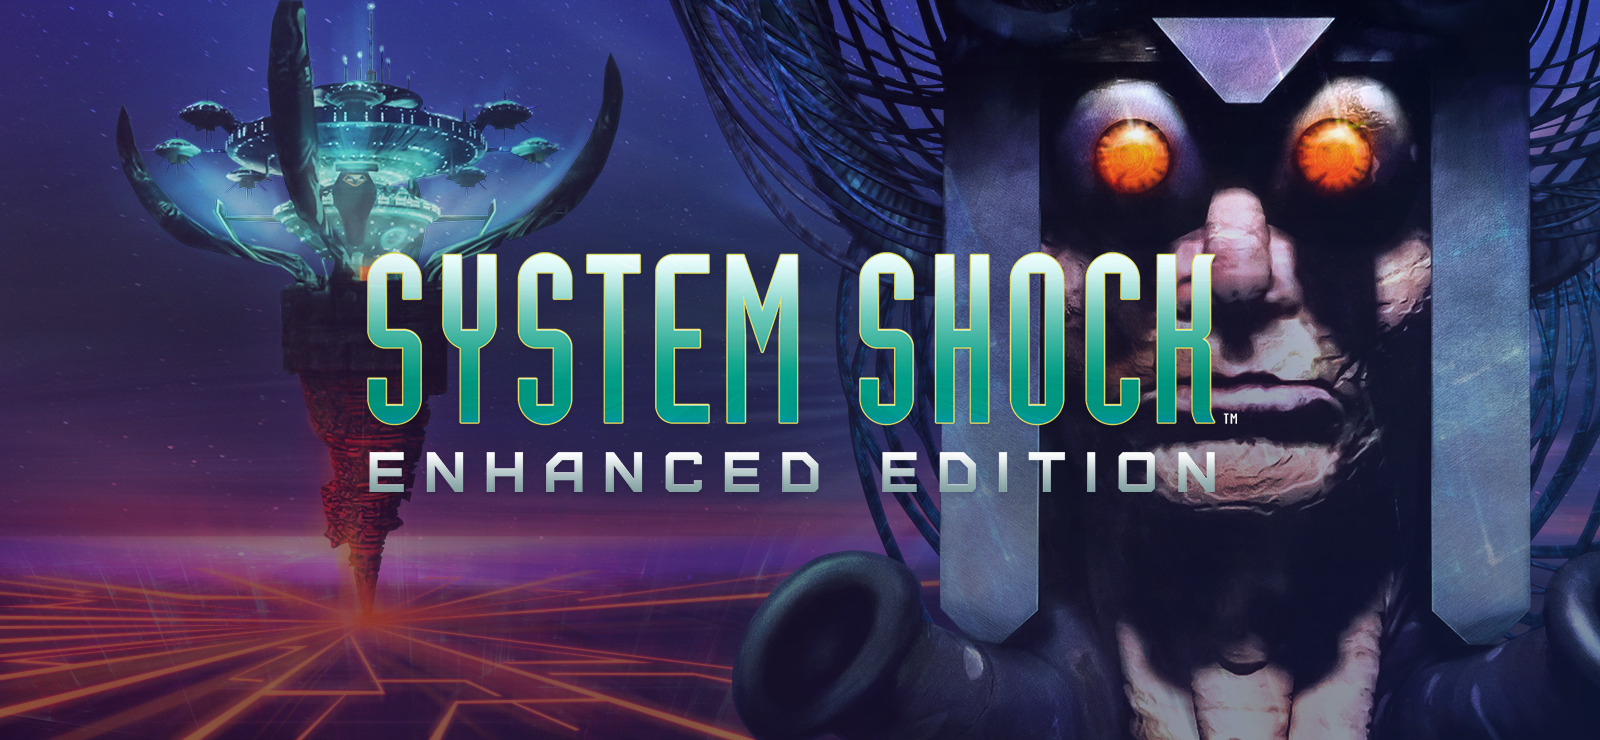 is system shock and bioshock related